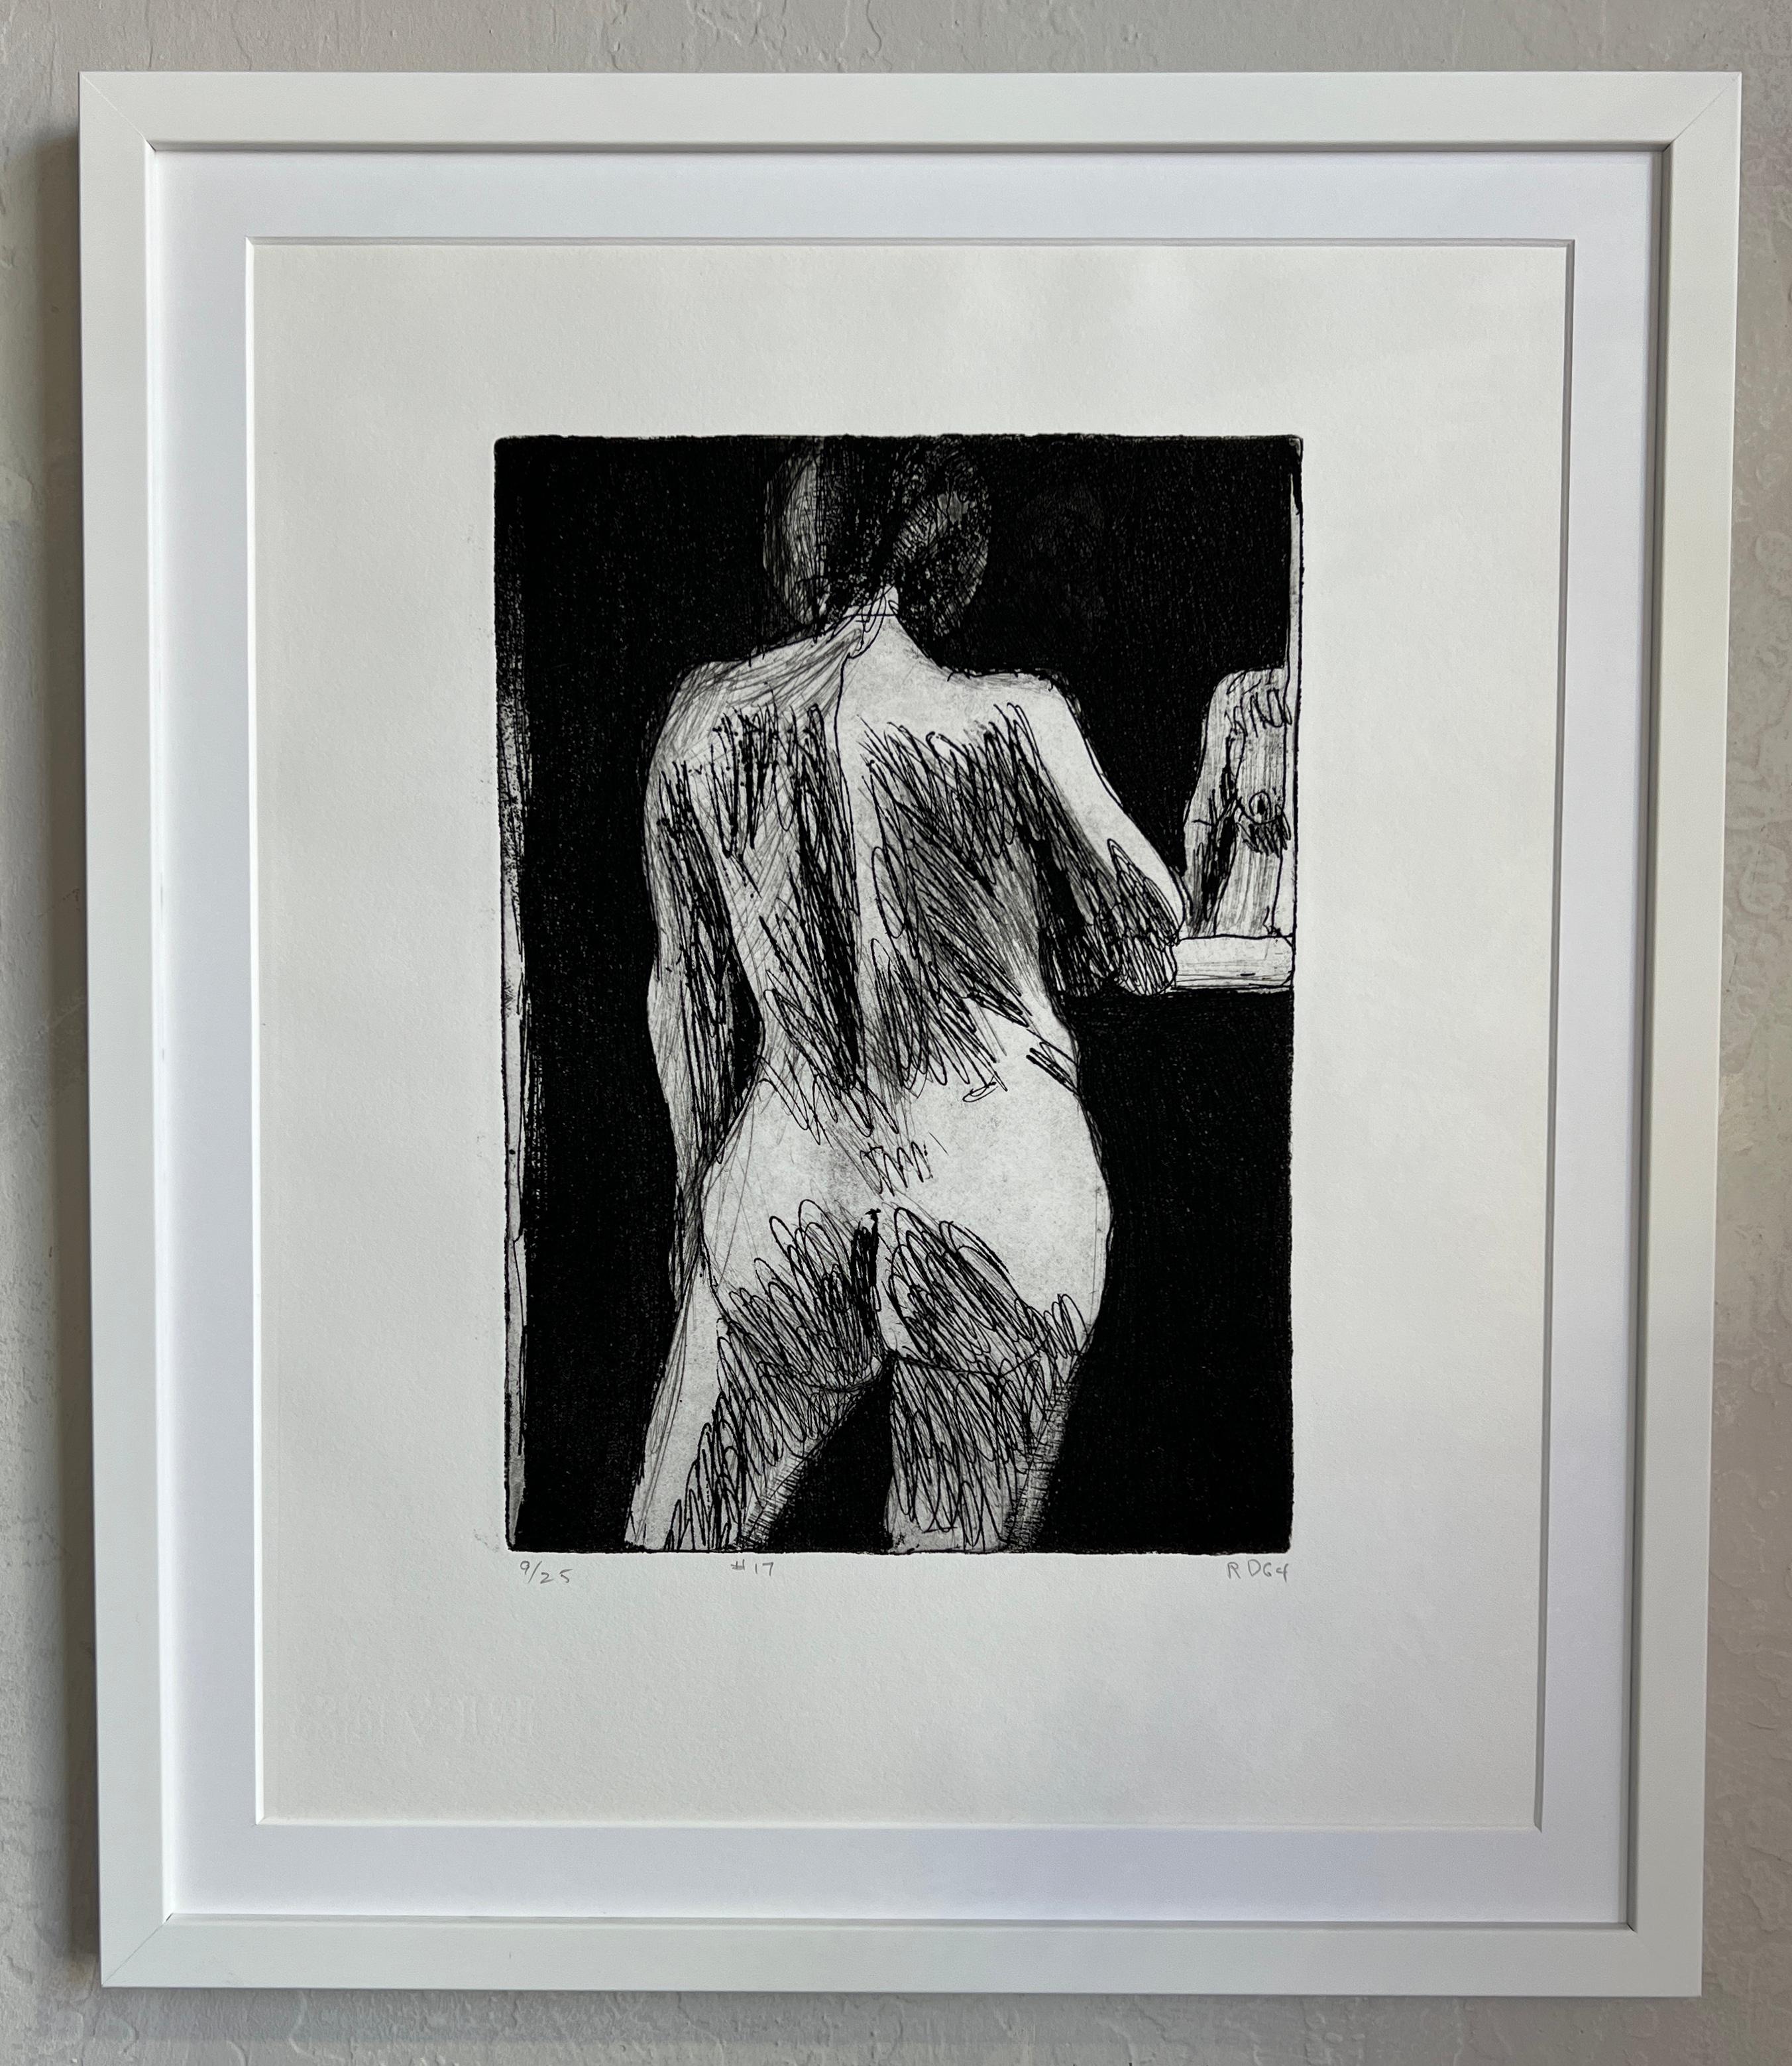 Offered here is a Richard Diebenkorn, #17 from 41 Etchings Drypoint.
Printed by Kathan Brown and Published by Crown Point Press

In the 1960s, Richard Diebenkorn began experimenting with printmaking at Crown Point Press, eventually publishing a